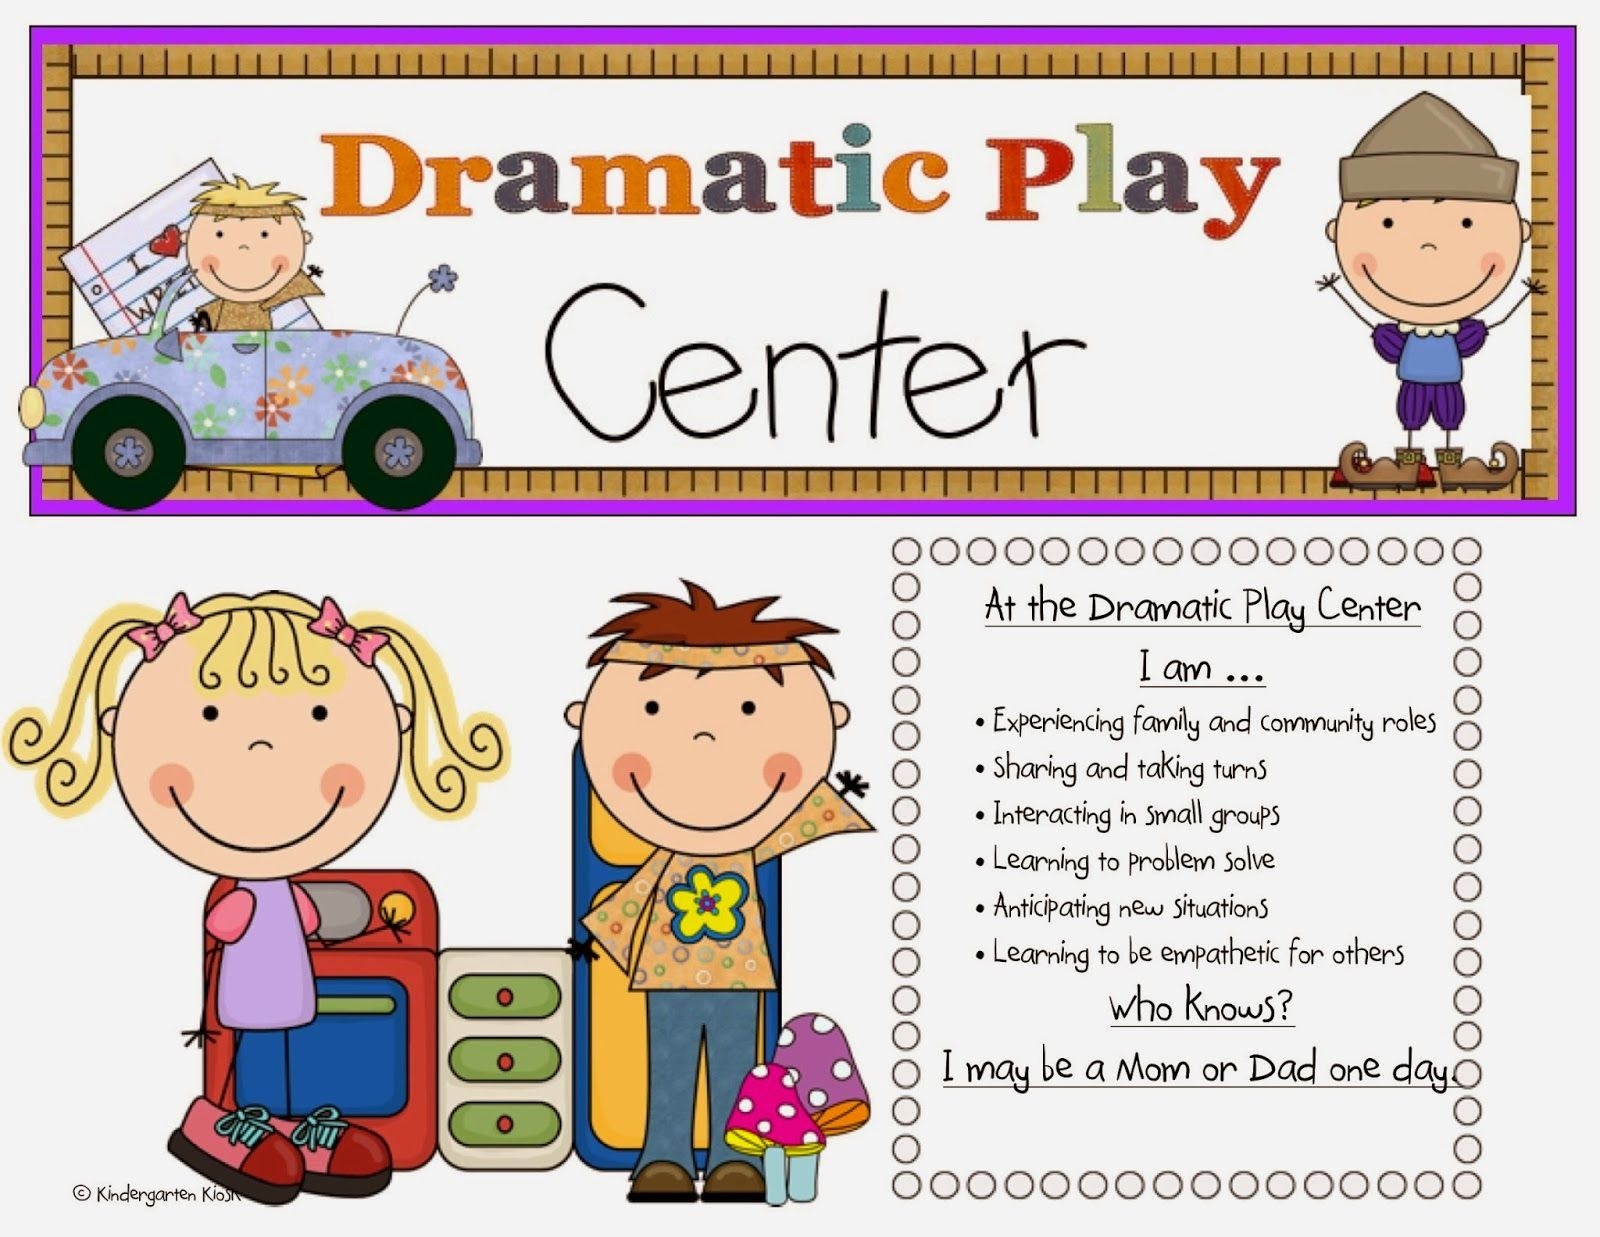 Meeting Common Core Standards Through Dramatic Play | School Stuff - Free Printable Learning Center Signs